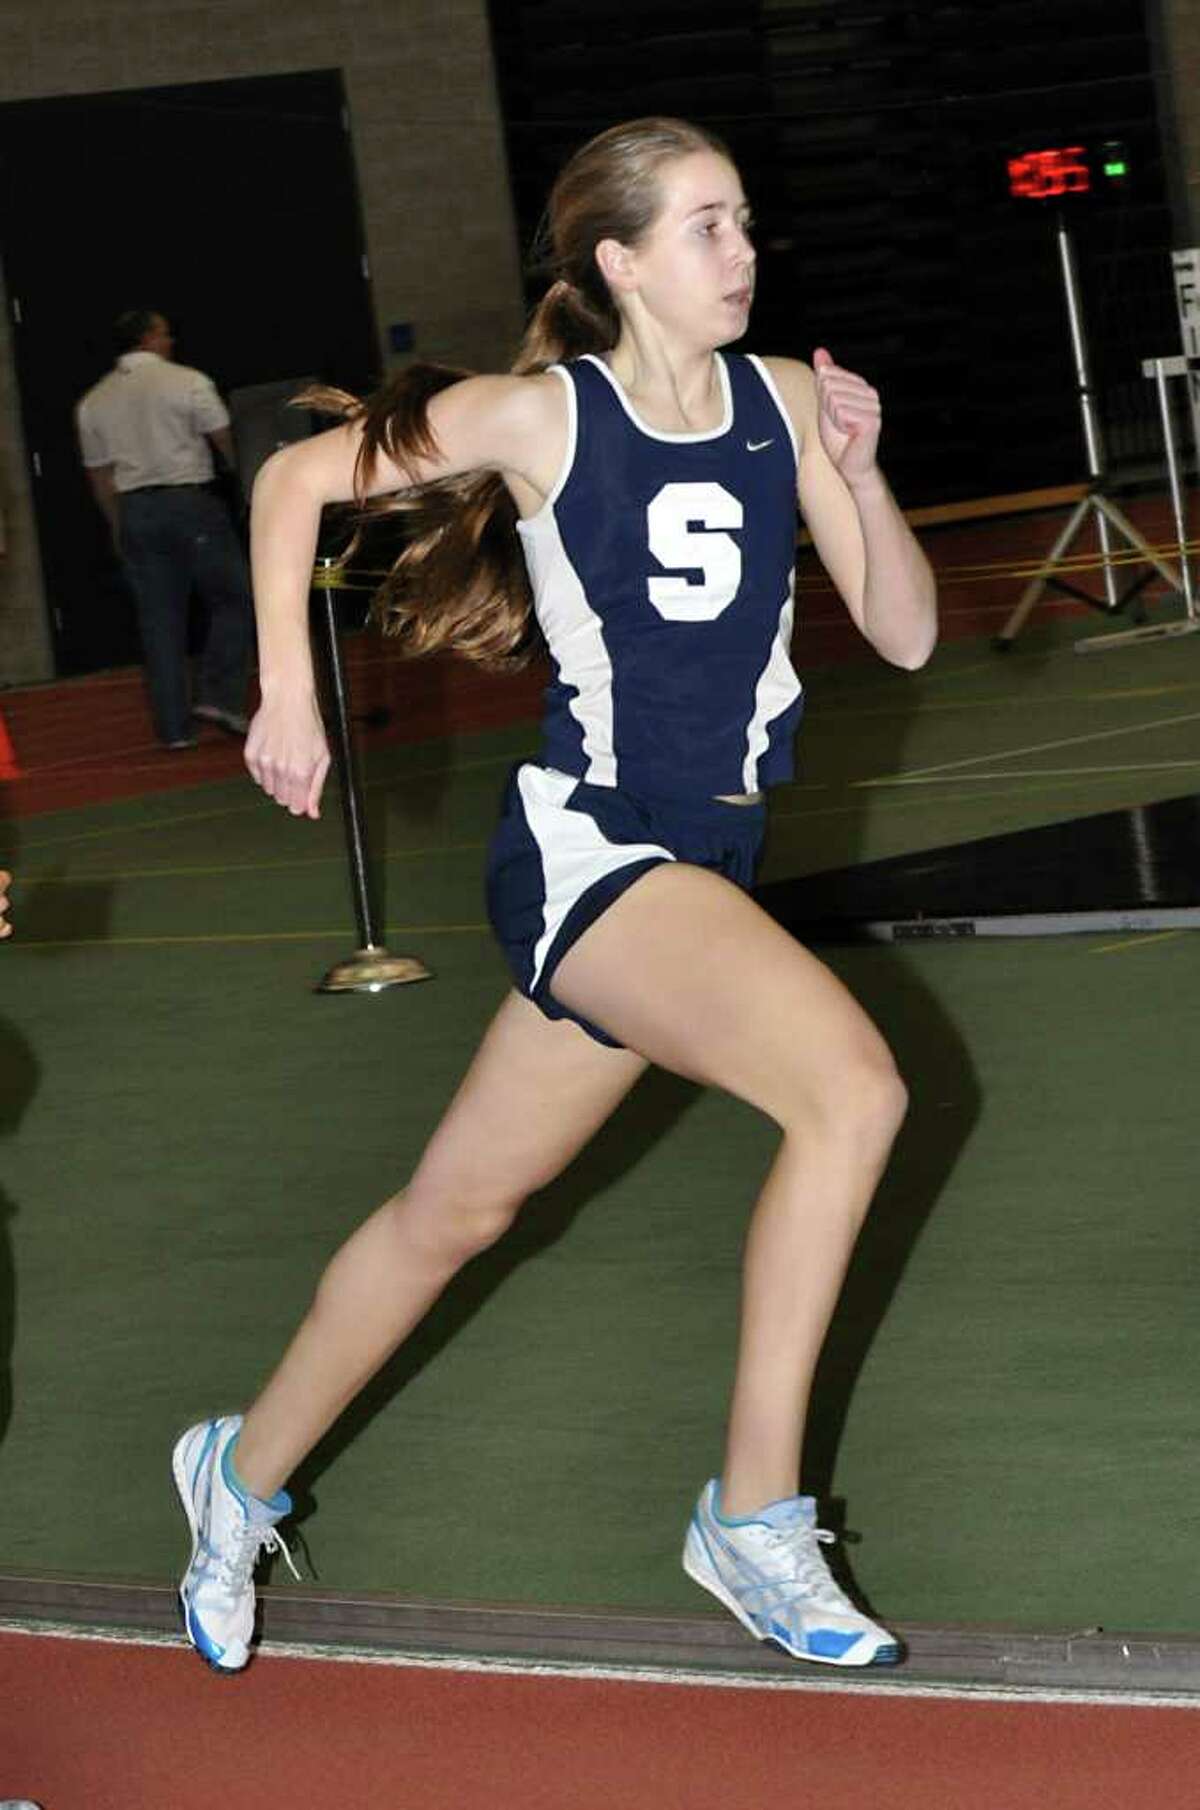 Ingrid Johnson was Staples' top runner from middle to long distance events the past two years and is competing for Johns Hopkins University this year.